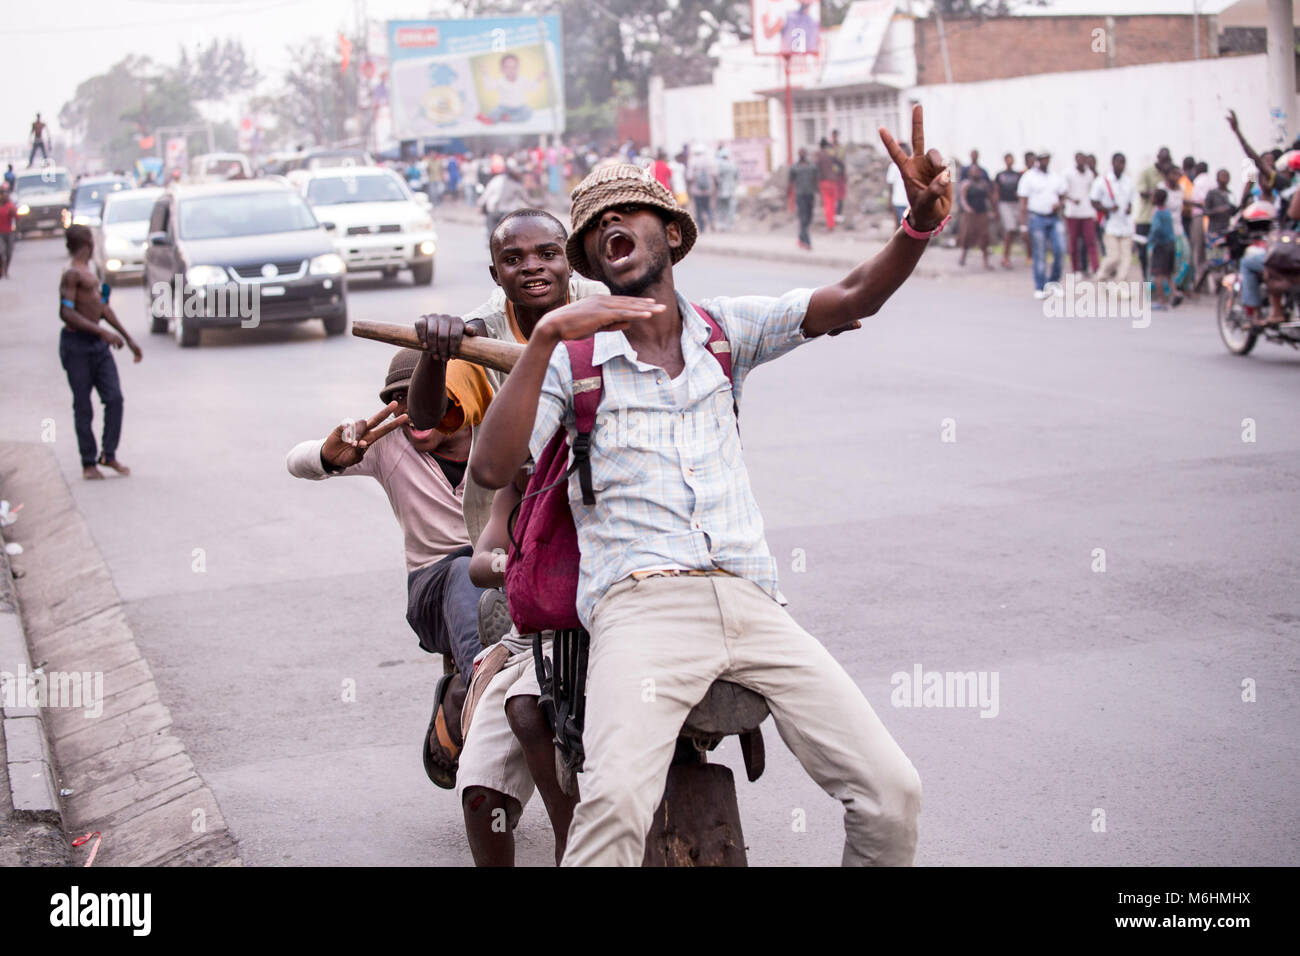 Revellers, riding on a wooden frame bicycle, the chukudu in Goma, motion cutting a throat after their Congo team won an international football match Stock Photo